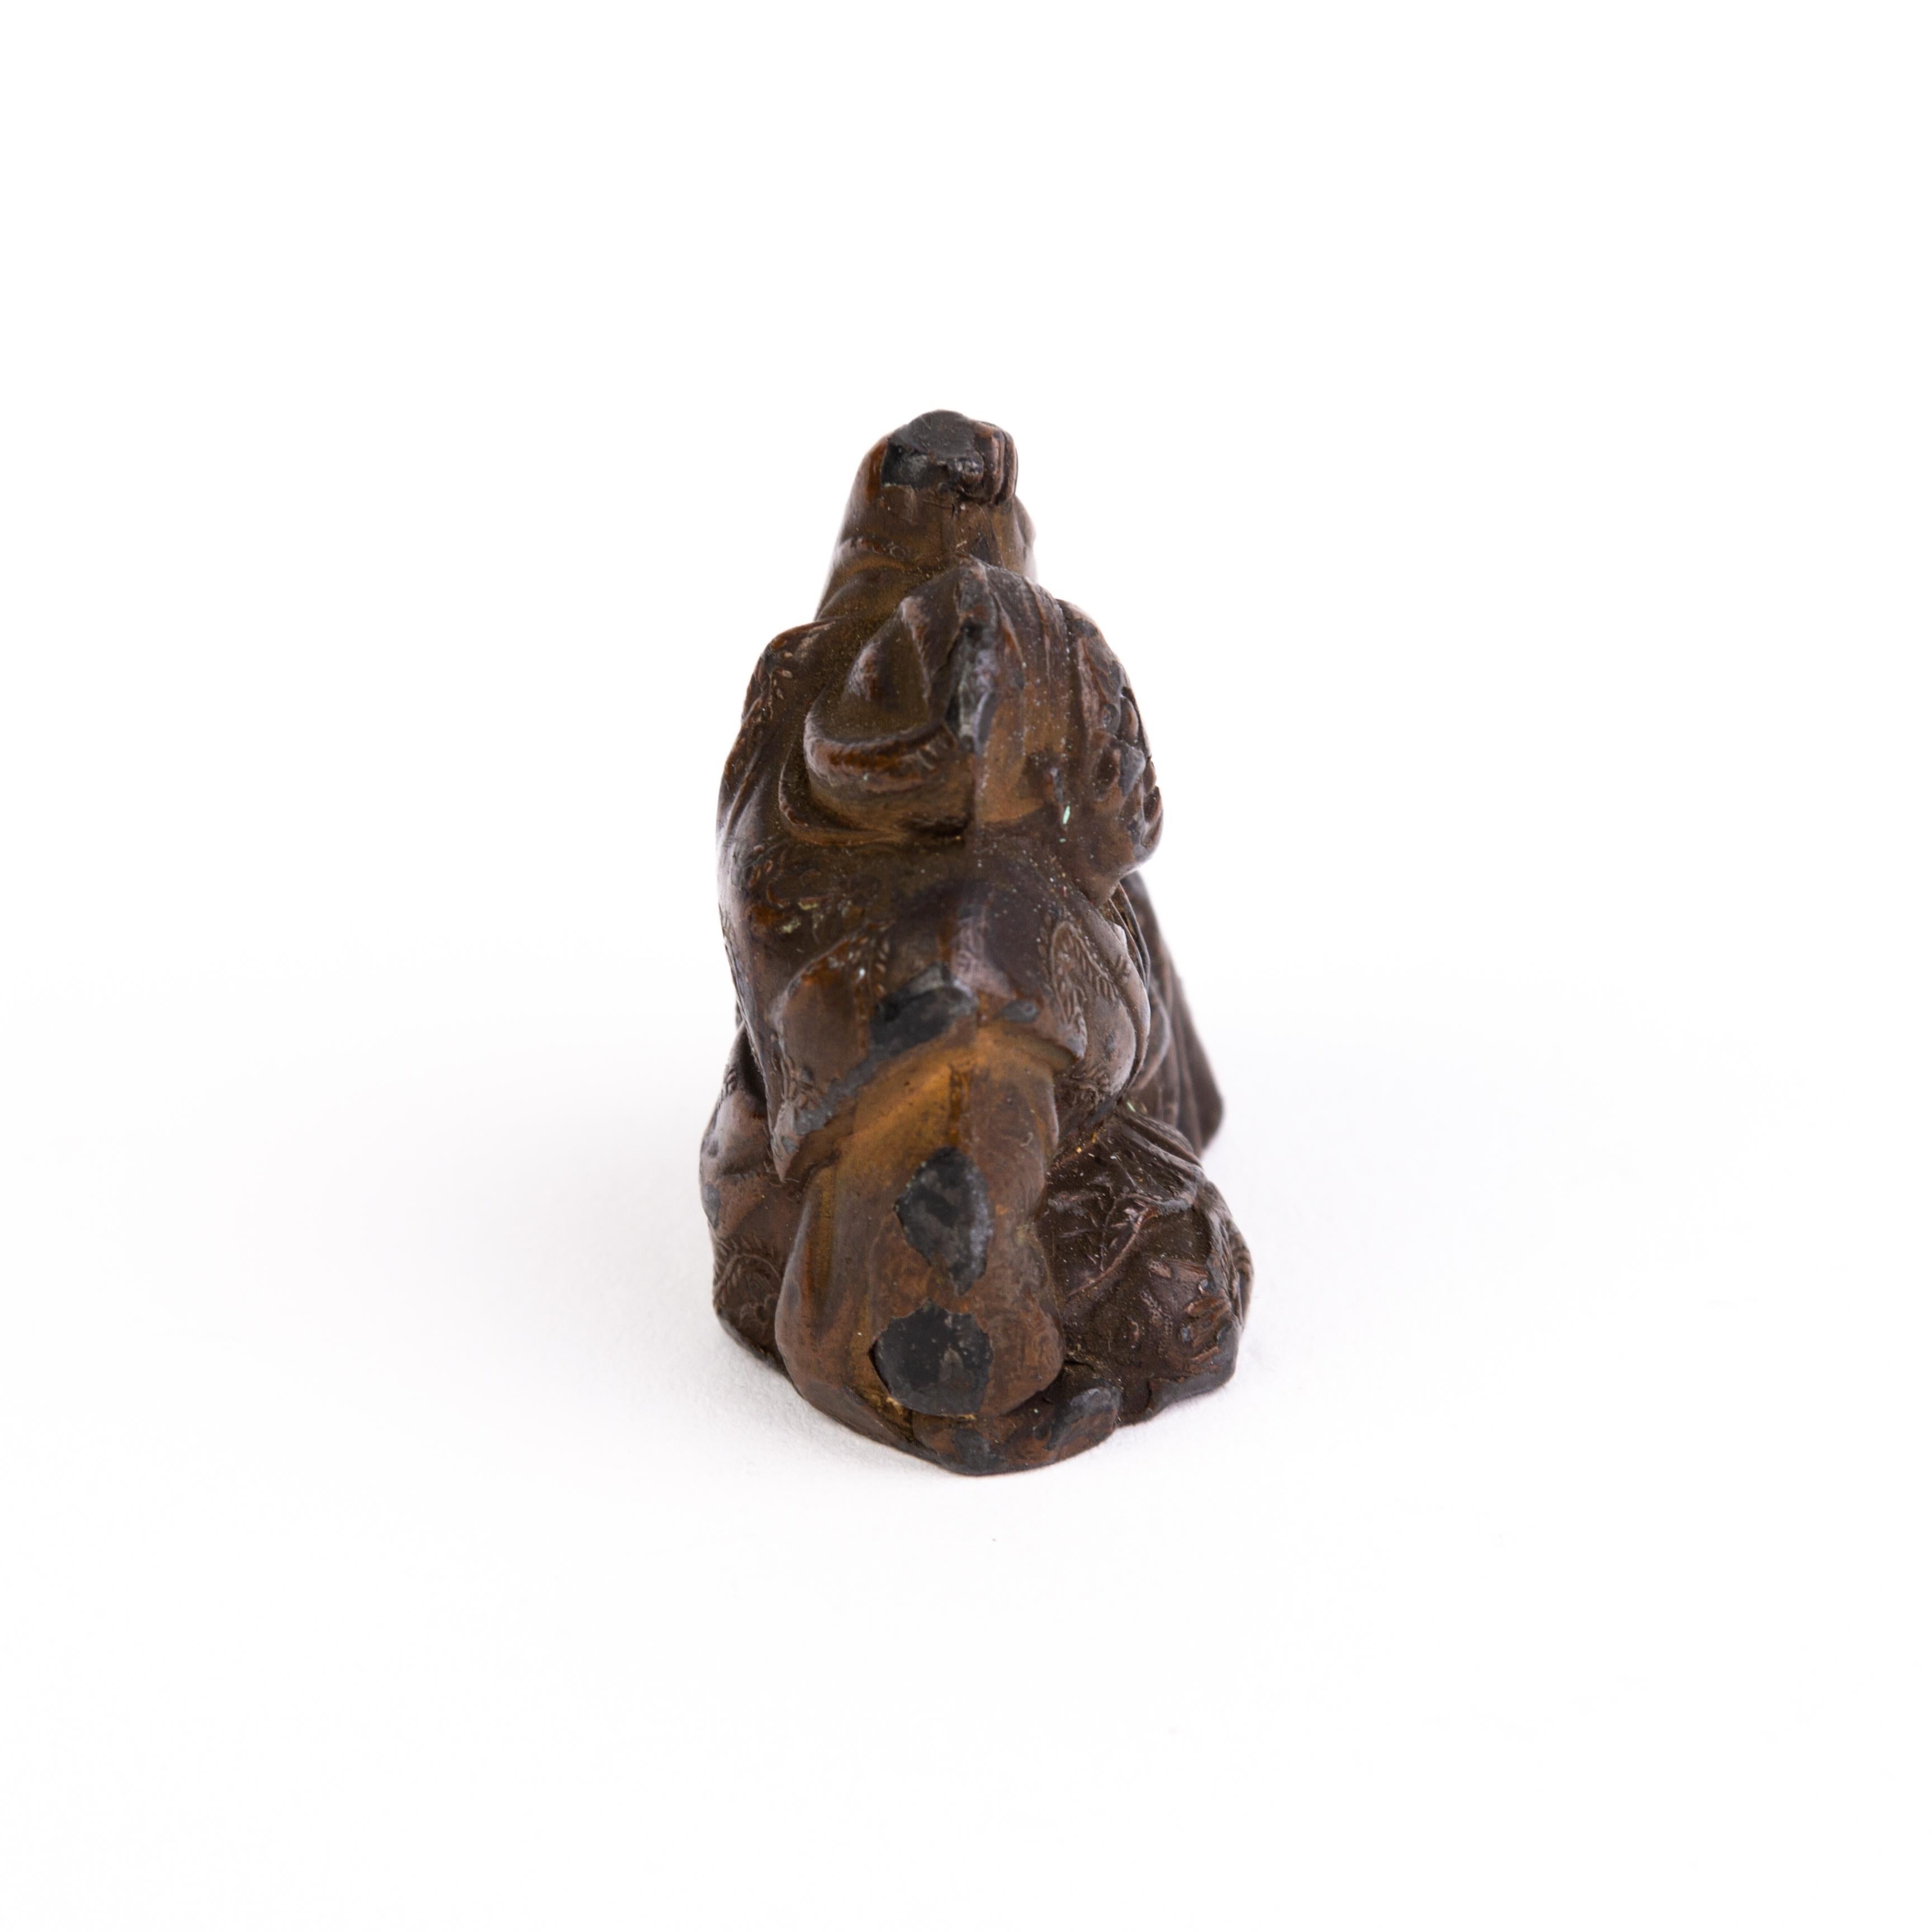 In good condition
From a private collection
Free international shipping
Japanese Bronze Netsuke Inro Meiji Sculpture 